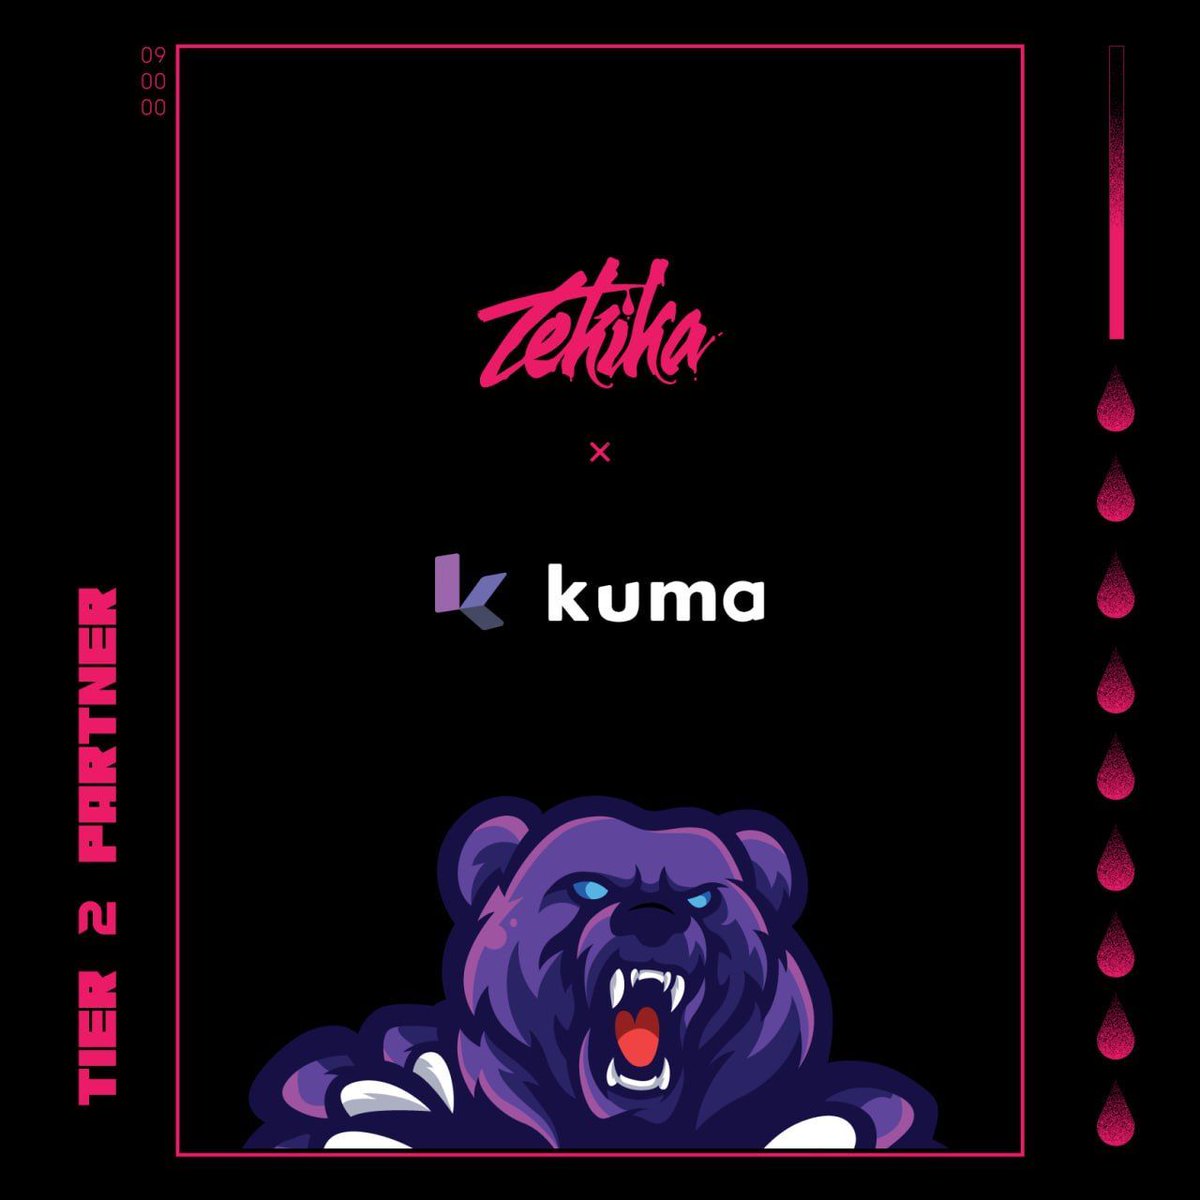 Bzzt 🤖 Incoming #airdrop partner inbound 🐻 Welcome @KumaProtocol to the Tekika #NFT adventure. Tier 2: $2️⃣.5️⃣k is dedicated to the #Kumaprotocol quest rewards🪂 Welcome aboard 🫡 Stay tuned for more Tekika updates coming soon!